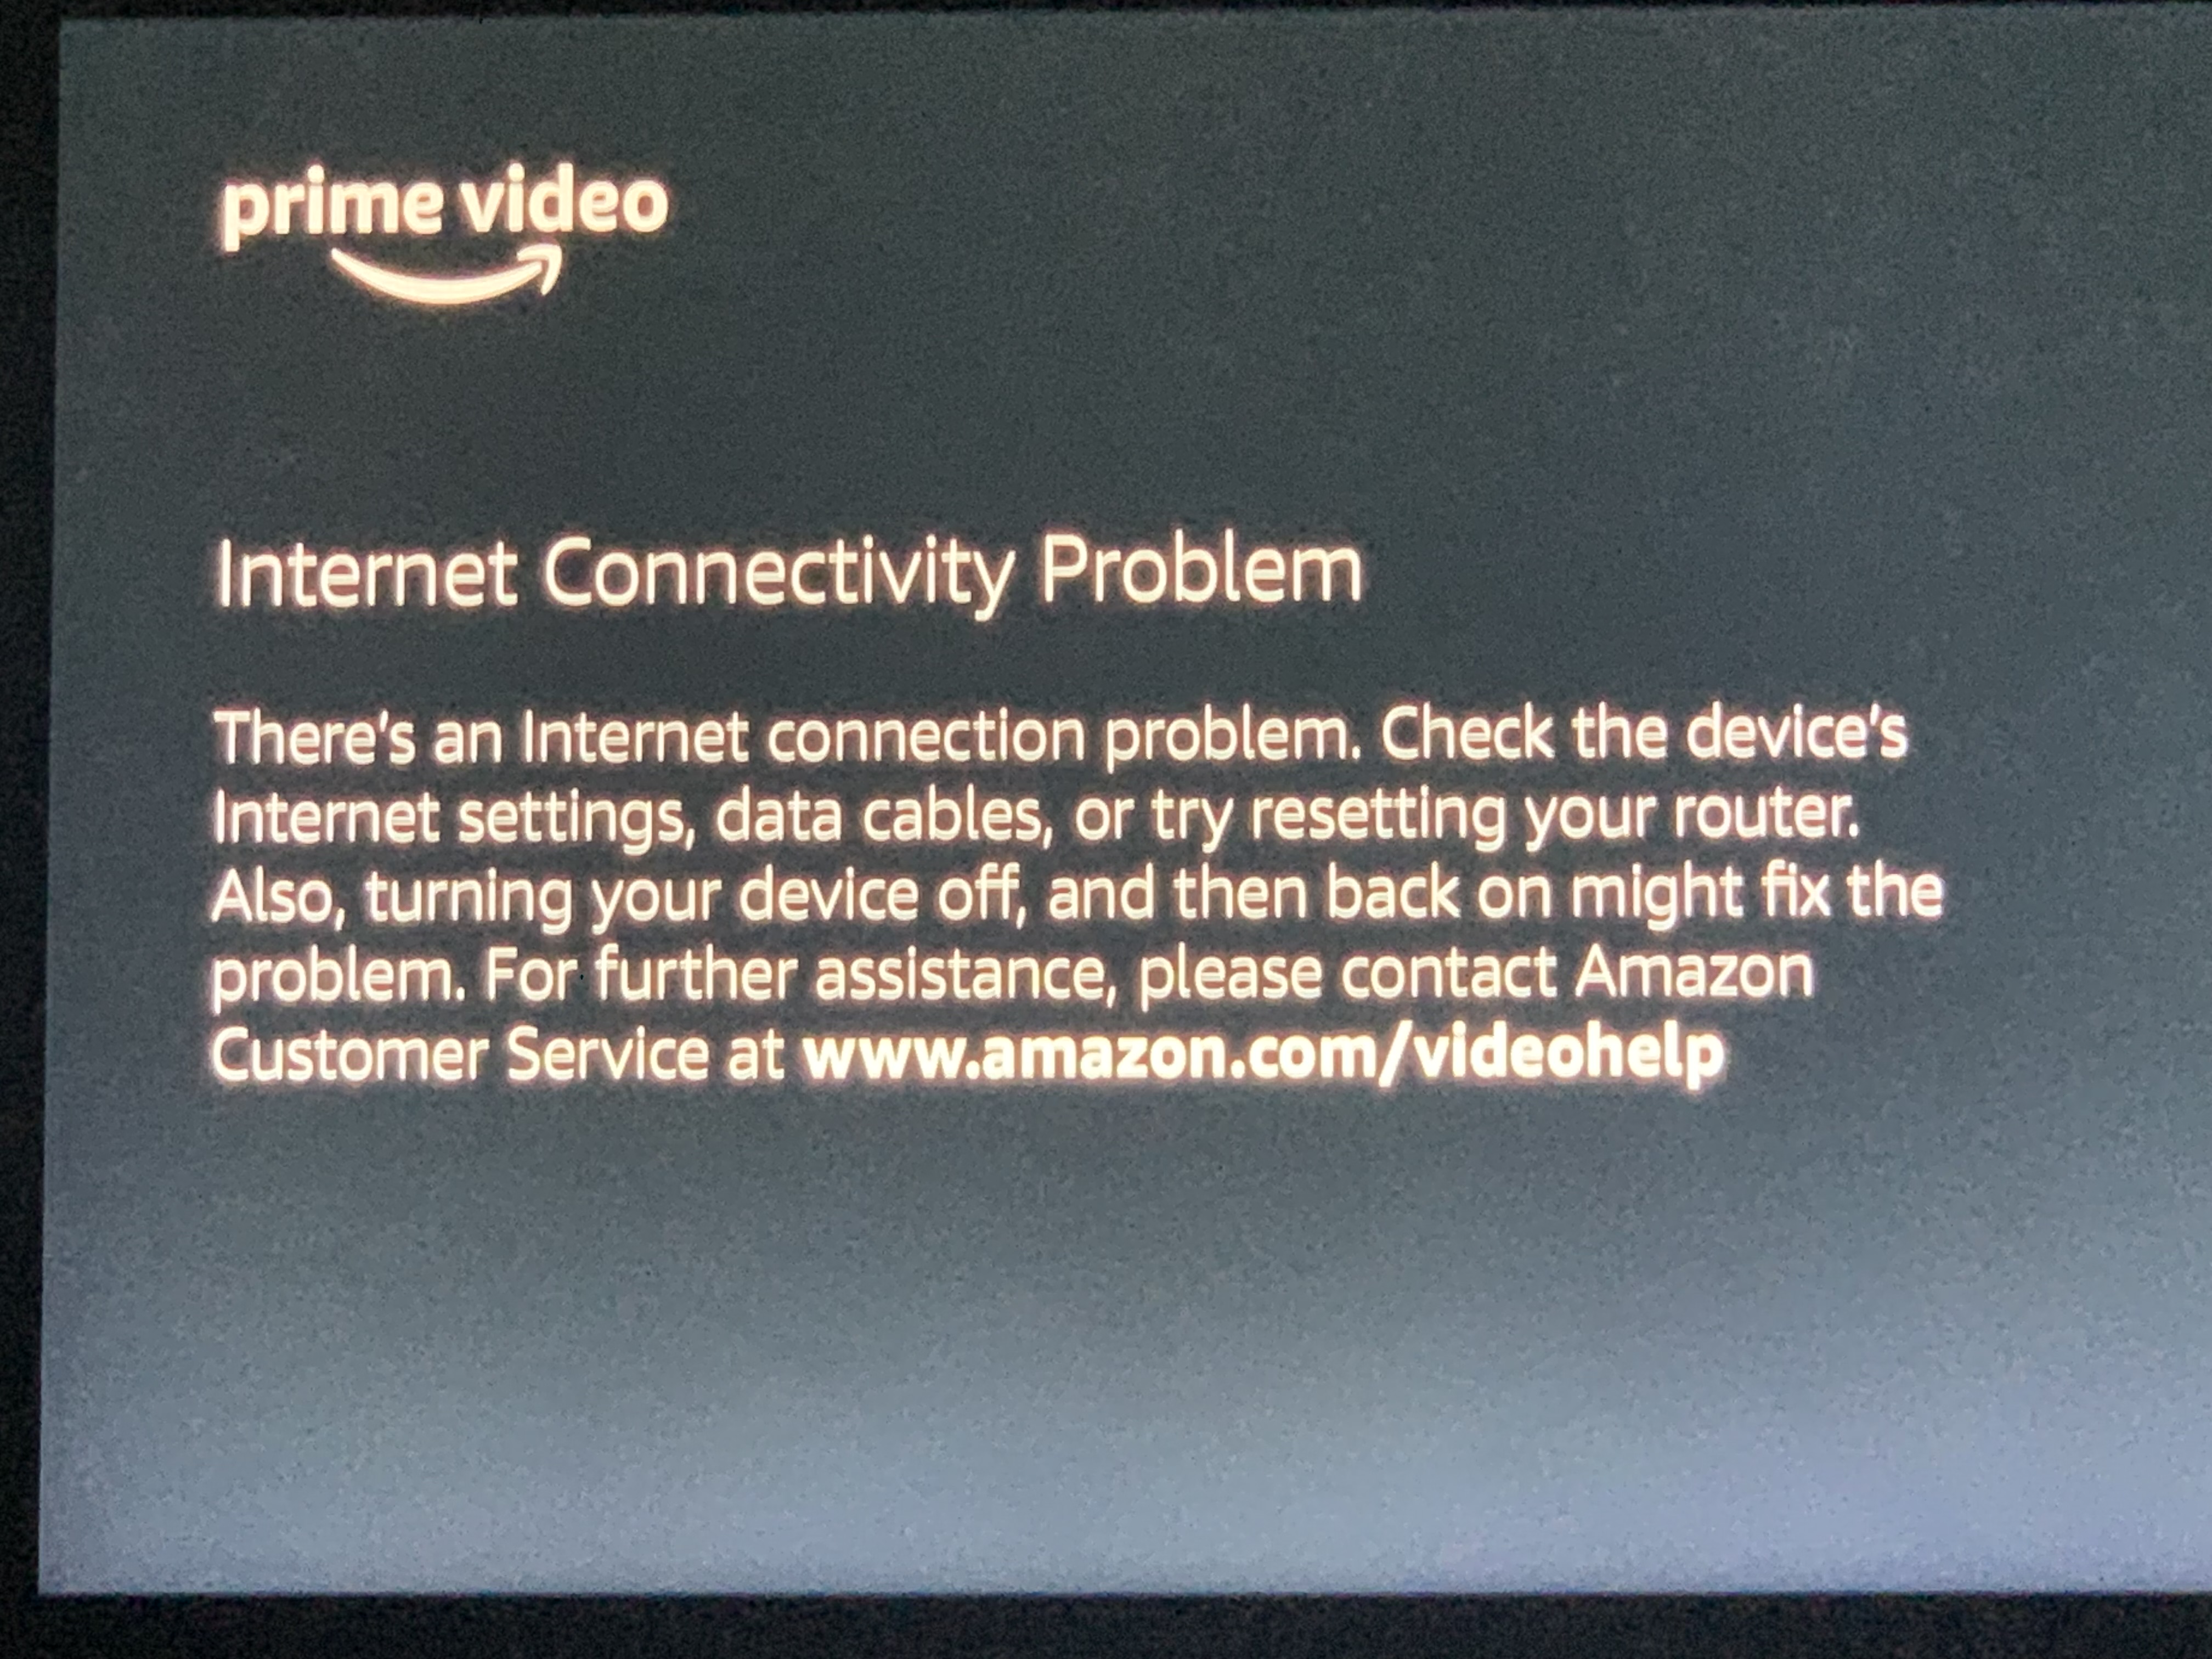 Problems to see Prime Video in my smart TV.